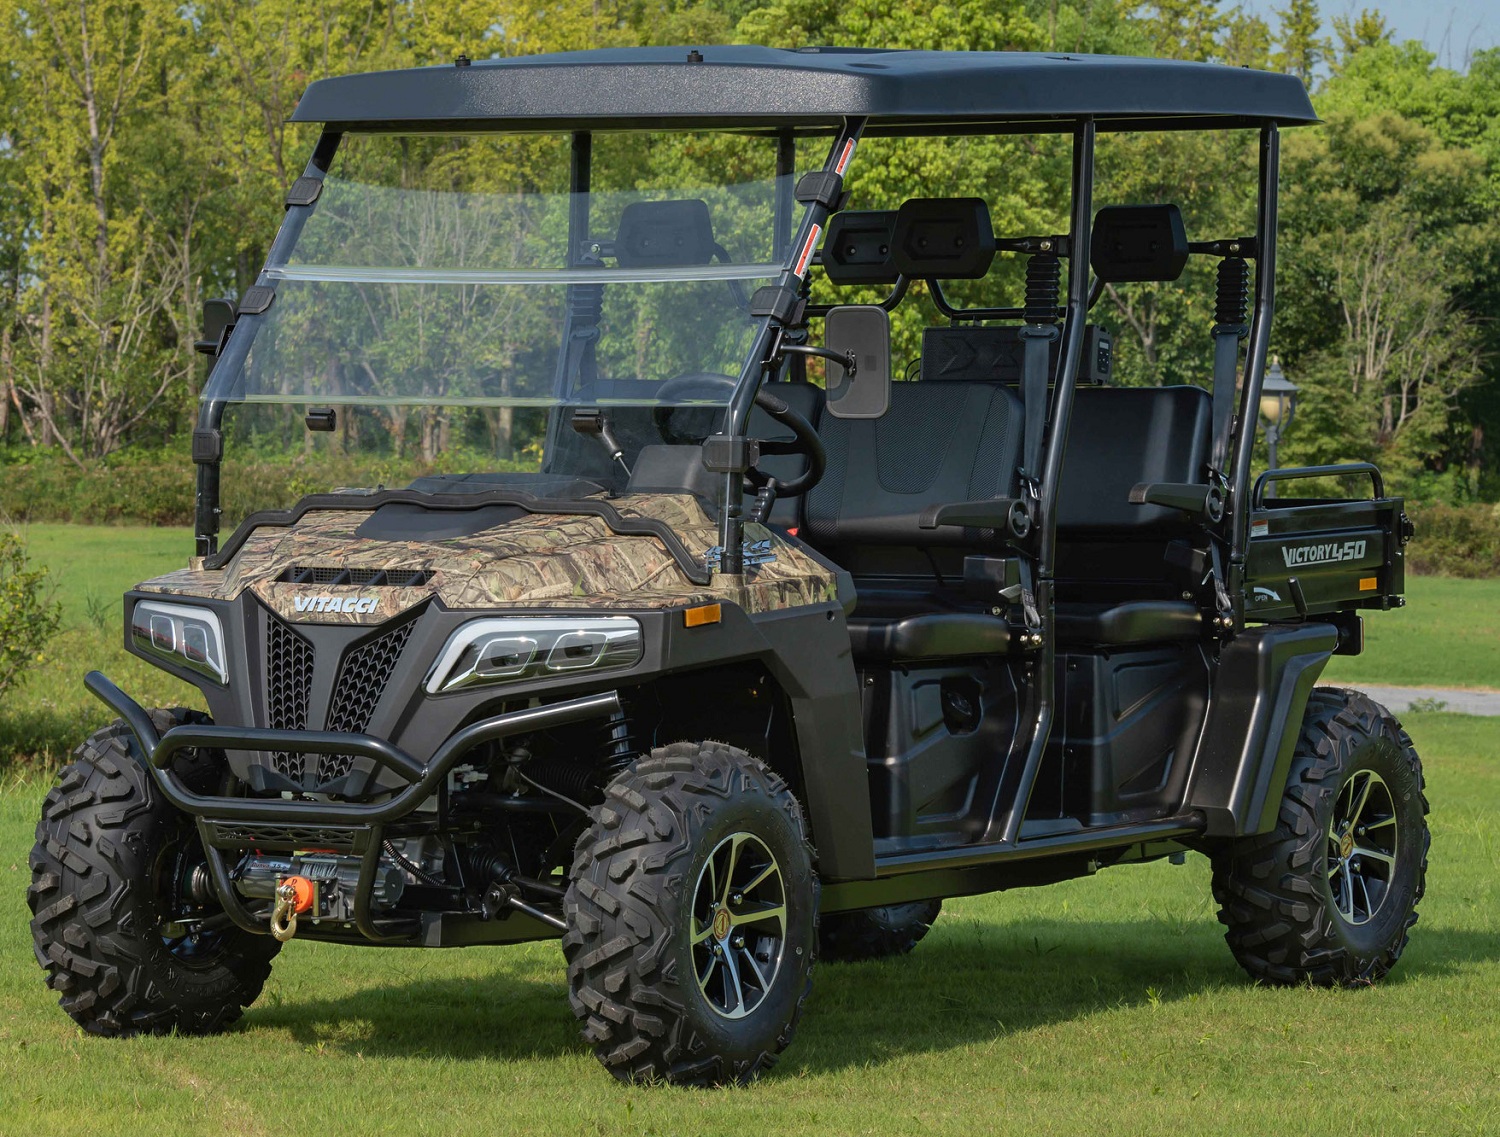 New Vitacci Victory 450 Pro Dlx Golf Cart Utv, 4-Seater, Single cylinder, water cool With Dumb Bed - Camo